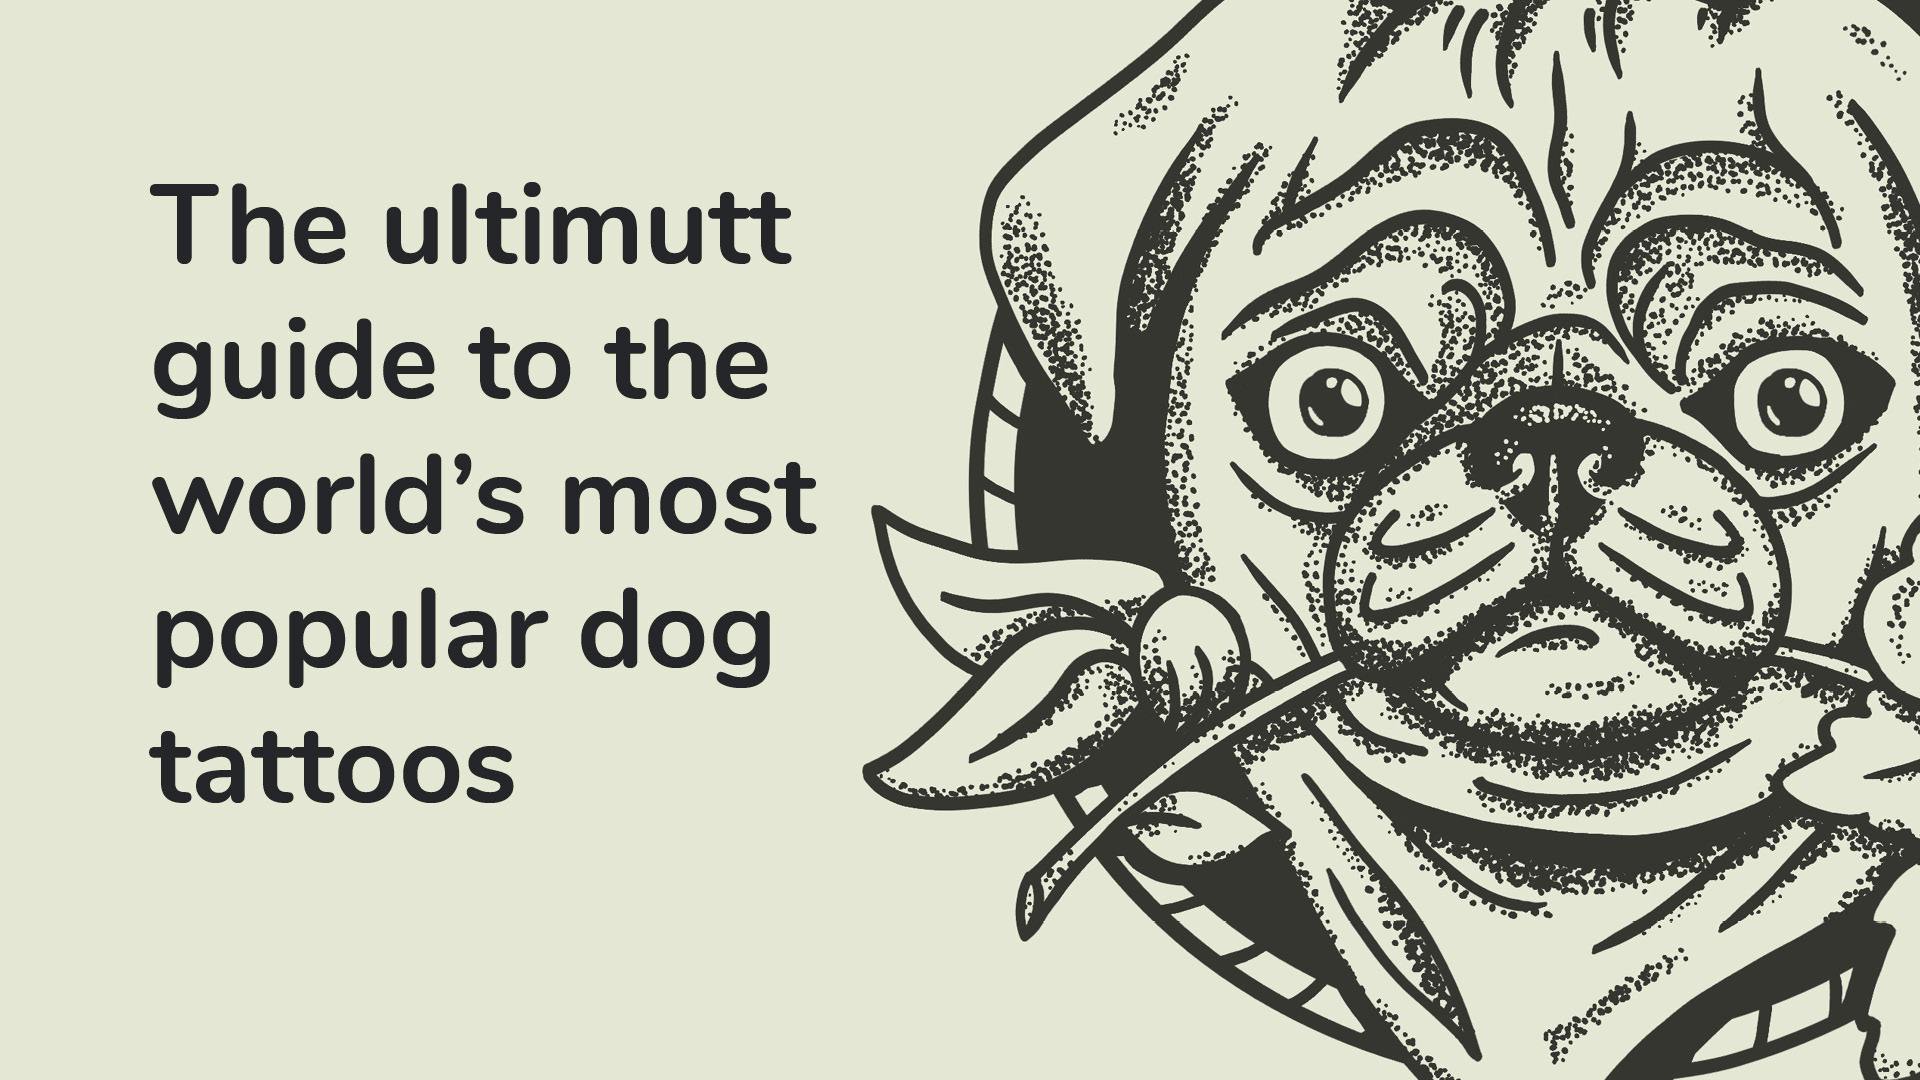 A dog tattoo stencil which reads: The ultimutt guide to the world’s most popular dog tattoos.